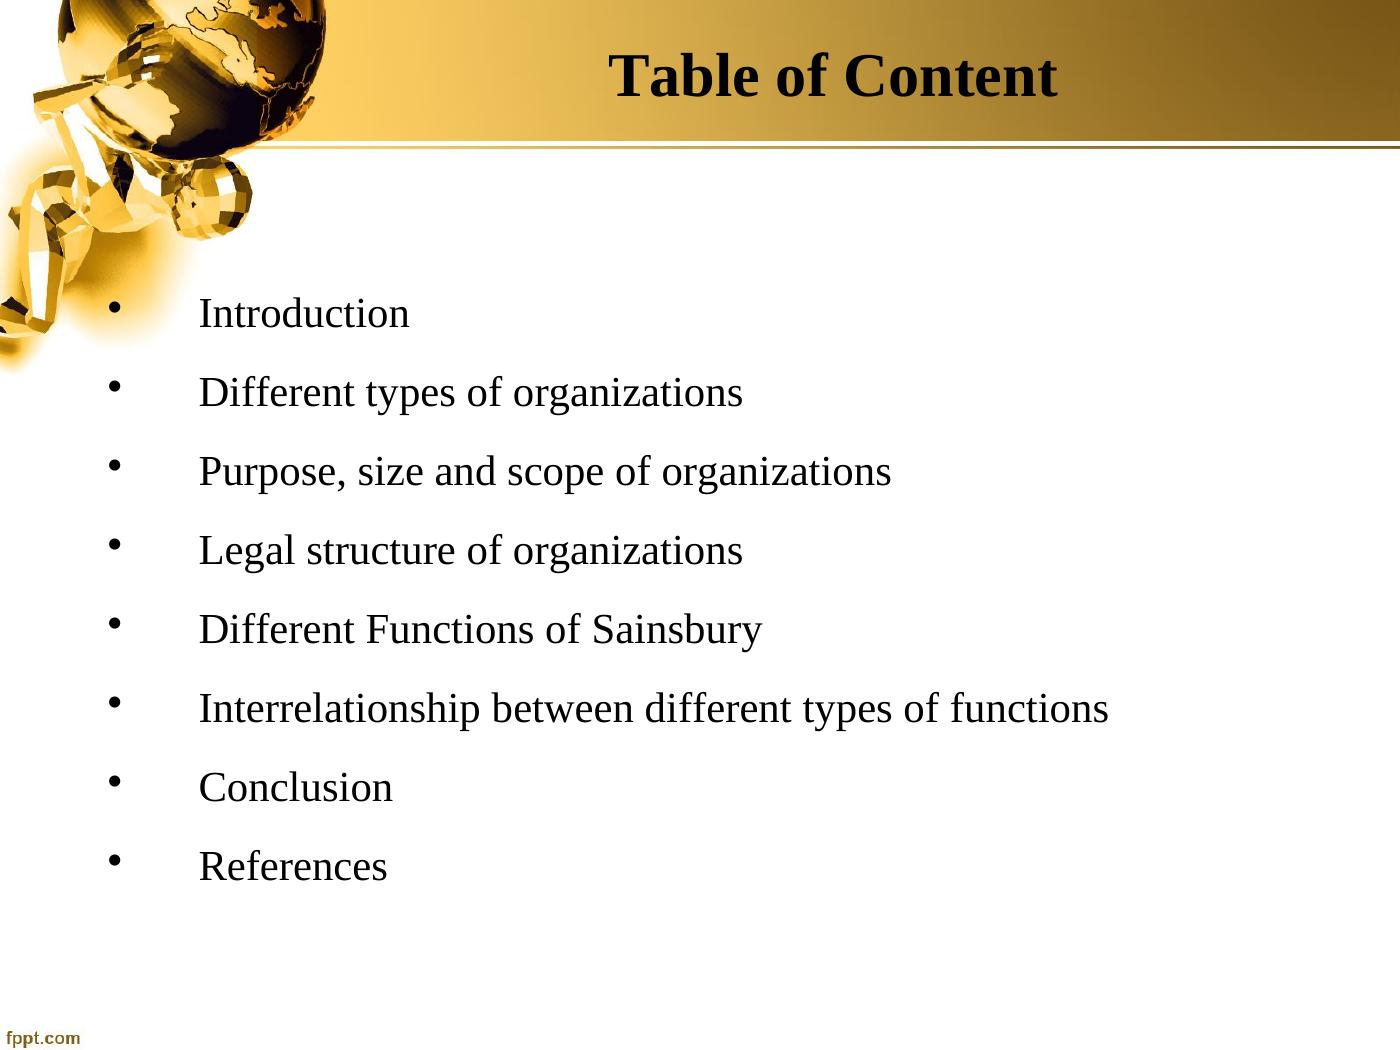 Different Types of Organizations and Their Functions_2